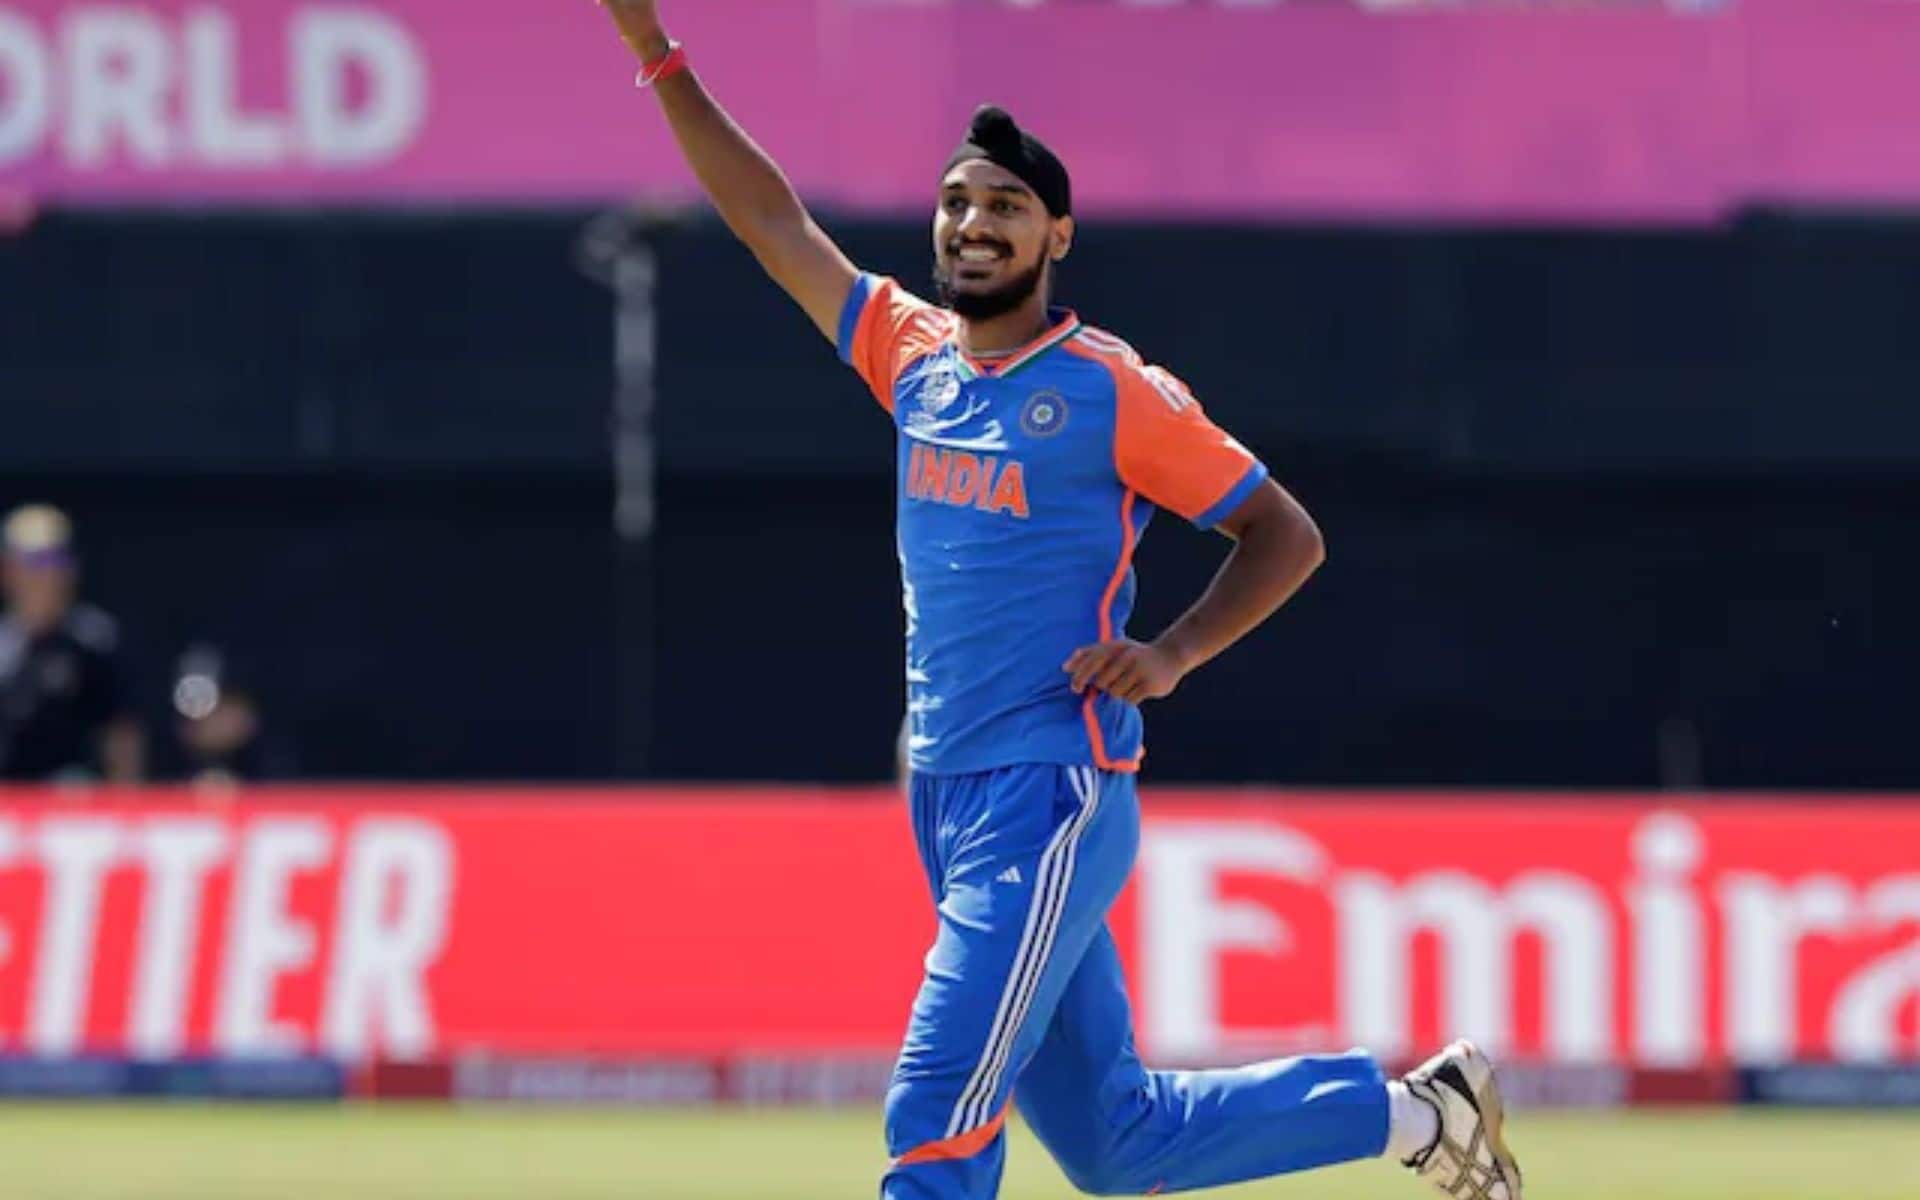 Arshdeep Singh Scripts History With First-Ball Wicket Vs USA; Joins Elite List